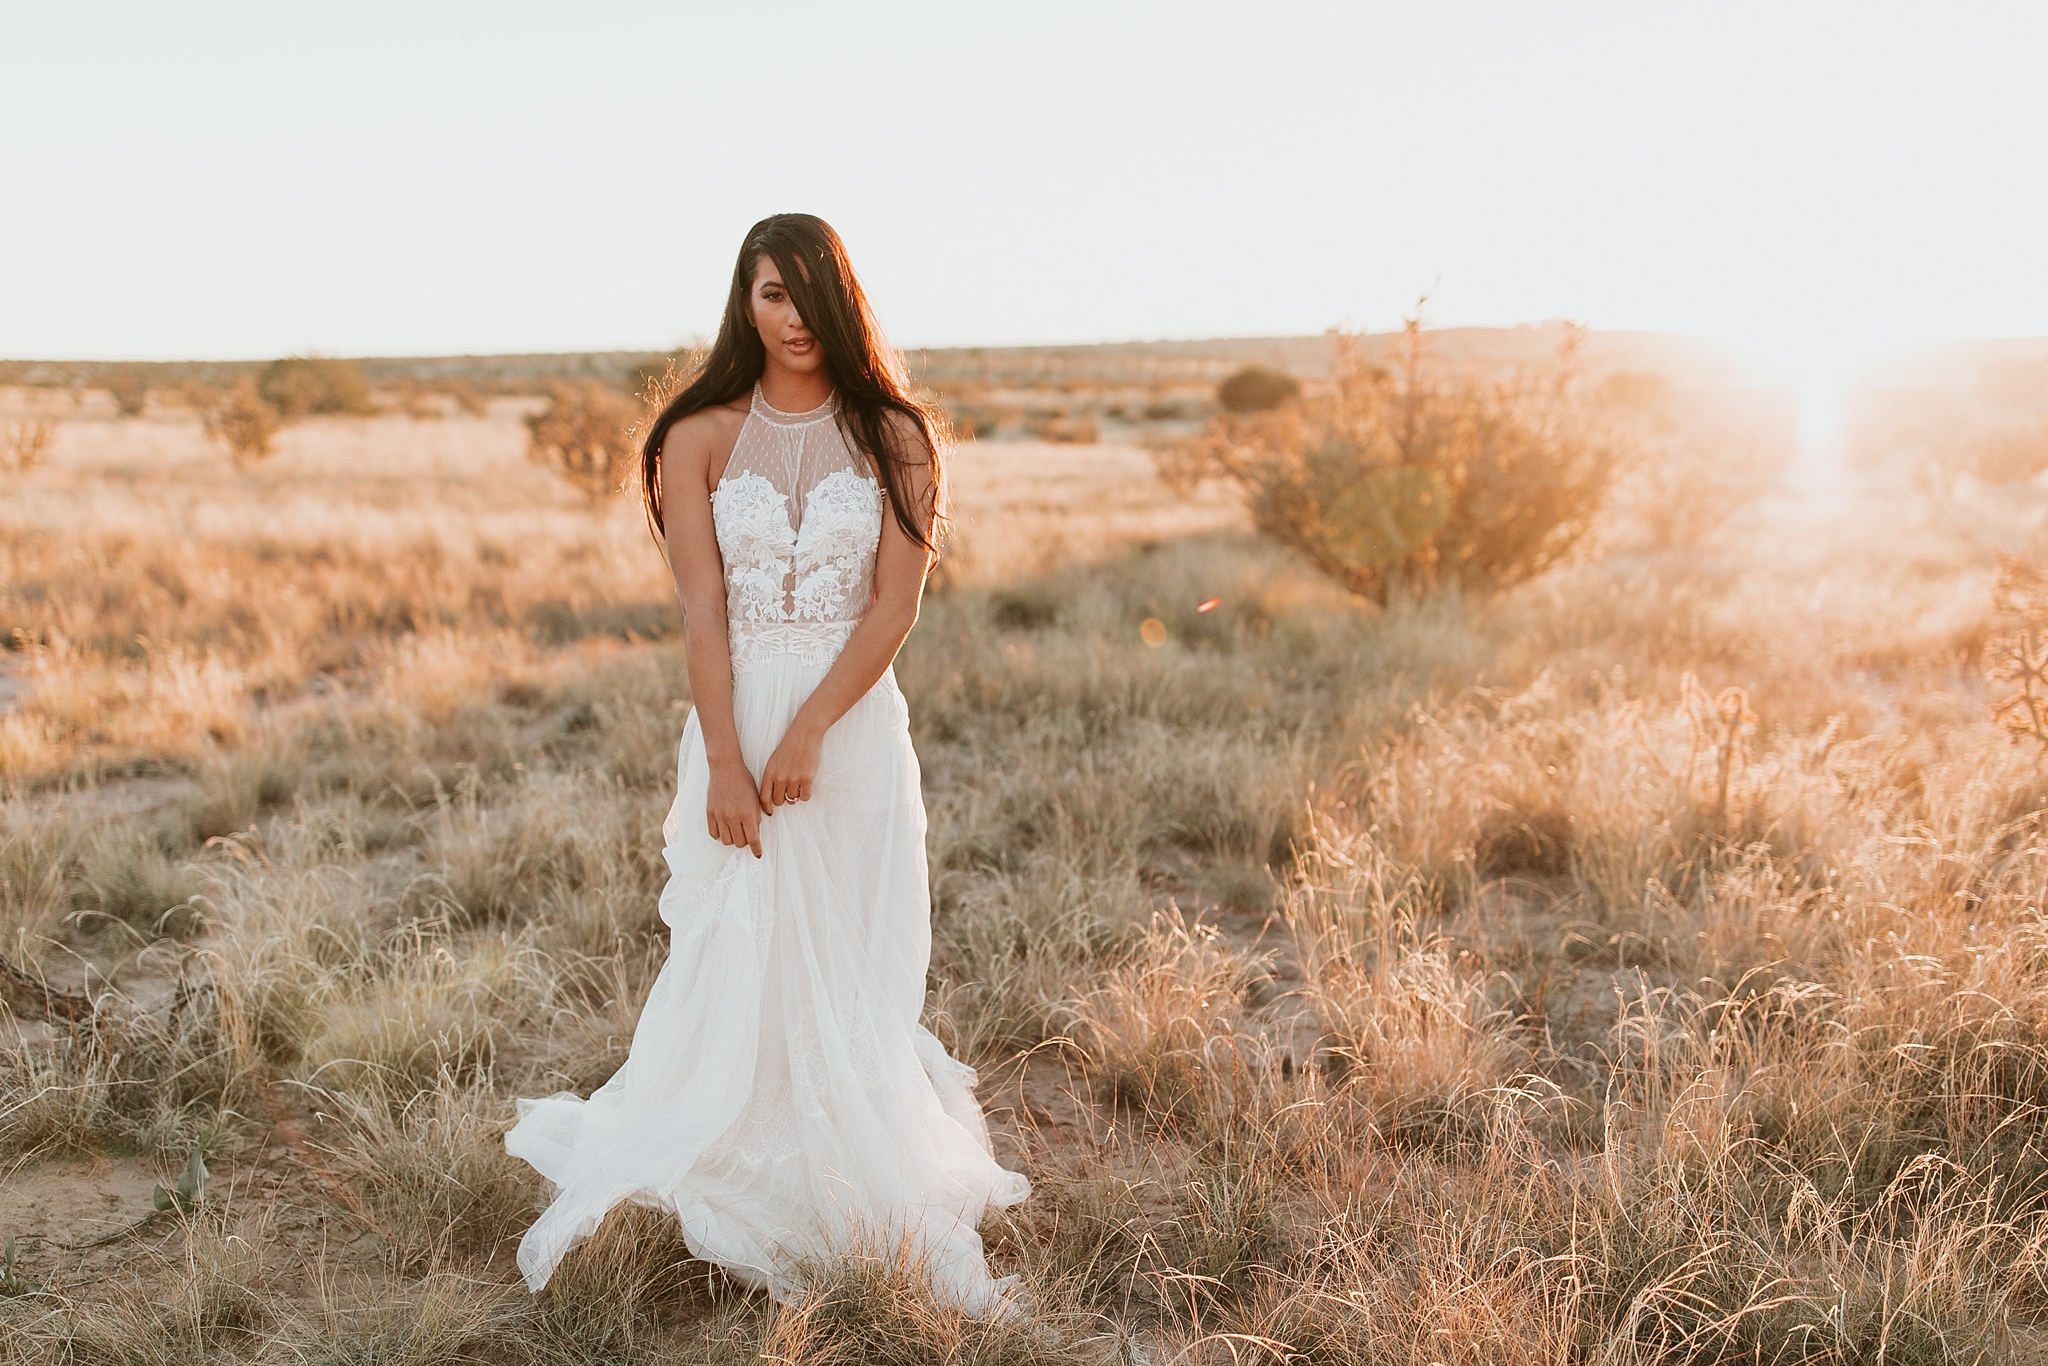 Alicia+lucia+photography+-+albuquerque+wedding+photographer+-+santa+fe+wedding+photography+-+new+mexico+wedding+photographer+-+new+mexico+wedding+-+wedding+gowns+-+bridal+gowns+-+a+line+wedding+gown_0056.jpg